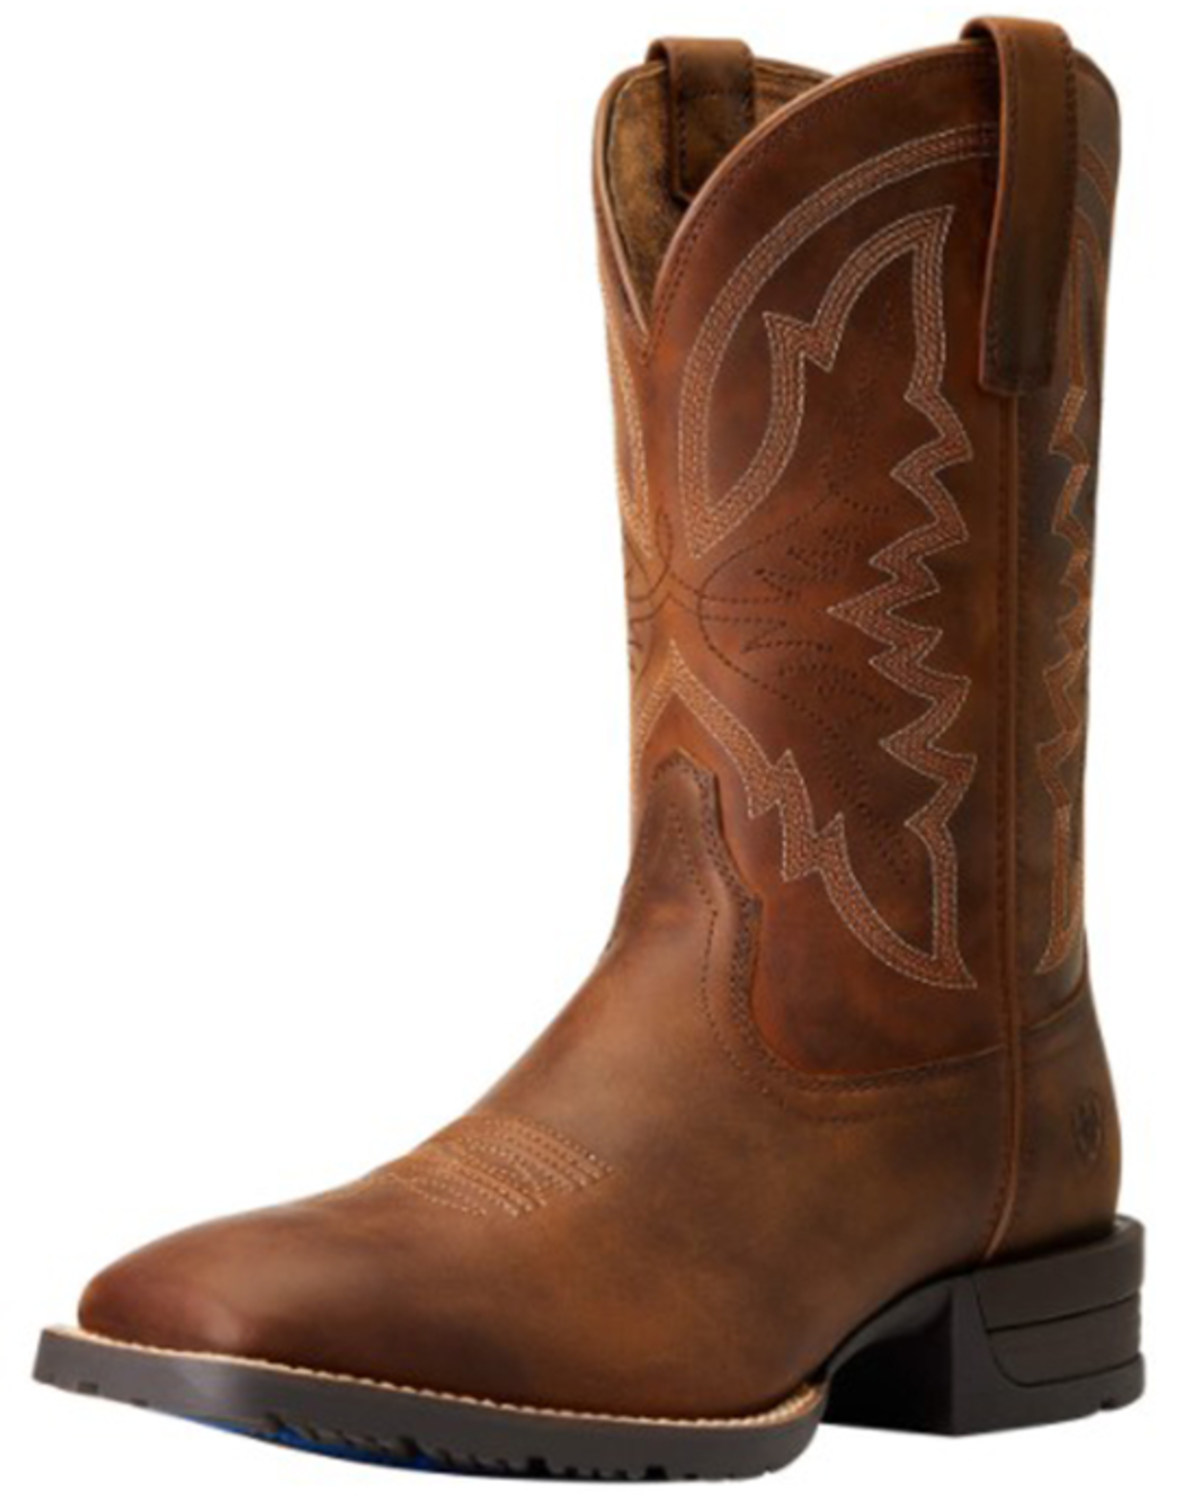 Ariat Men's Hybrid Ranchwork Western Boots - Broad Square Toe